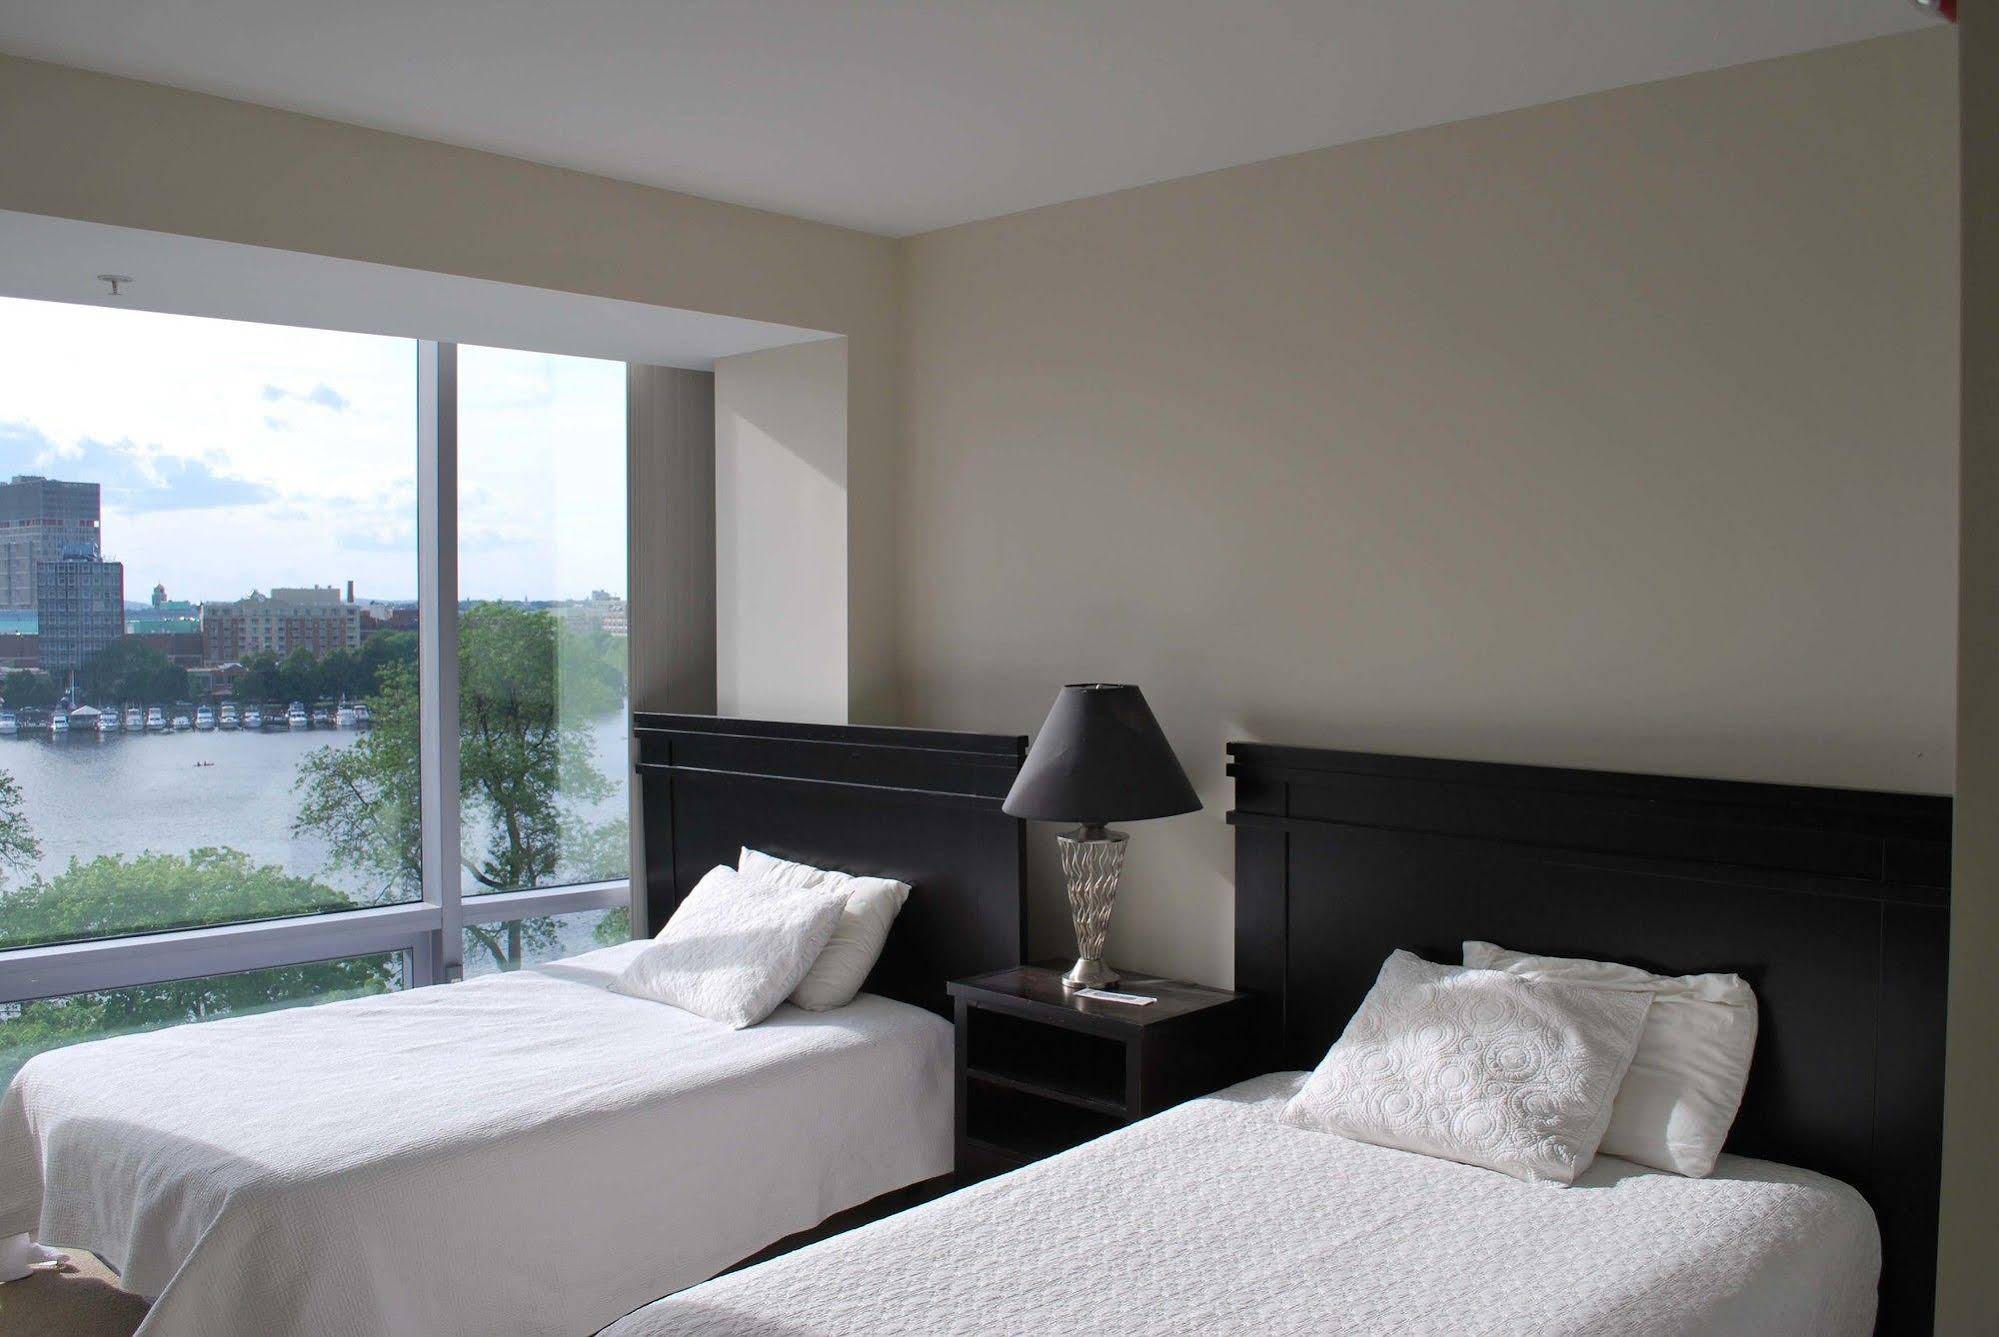 Charles River Executive Suites